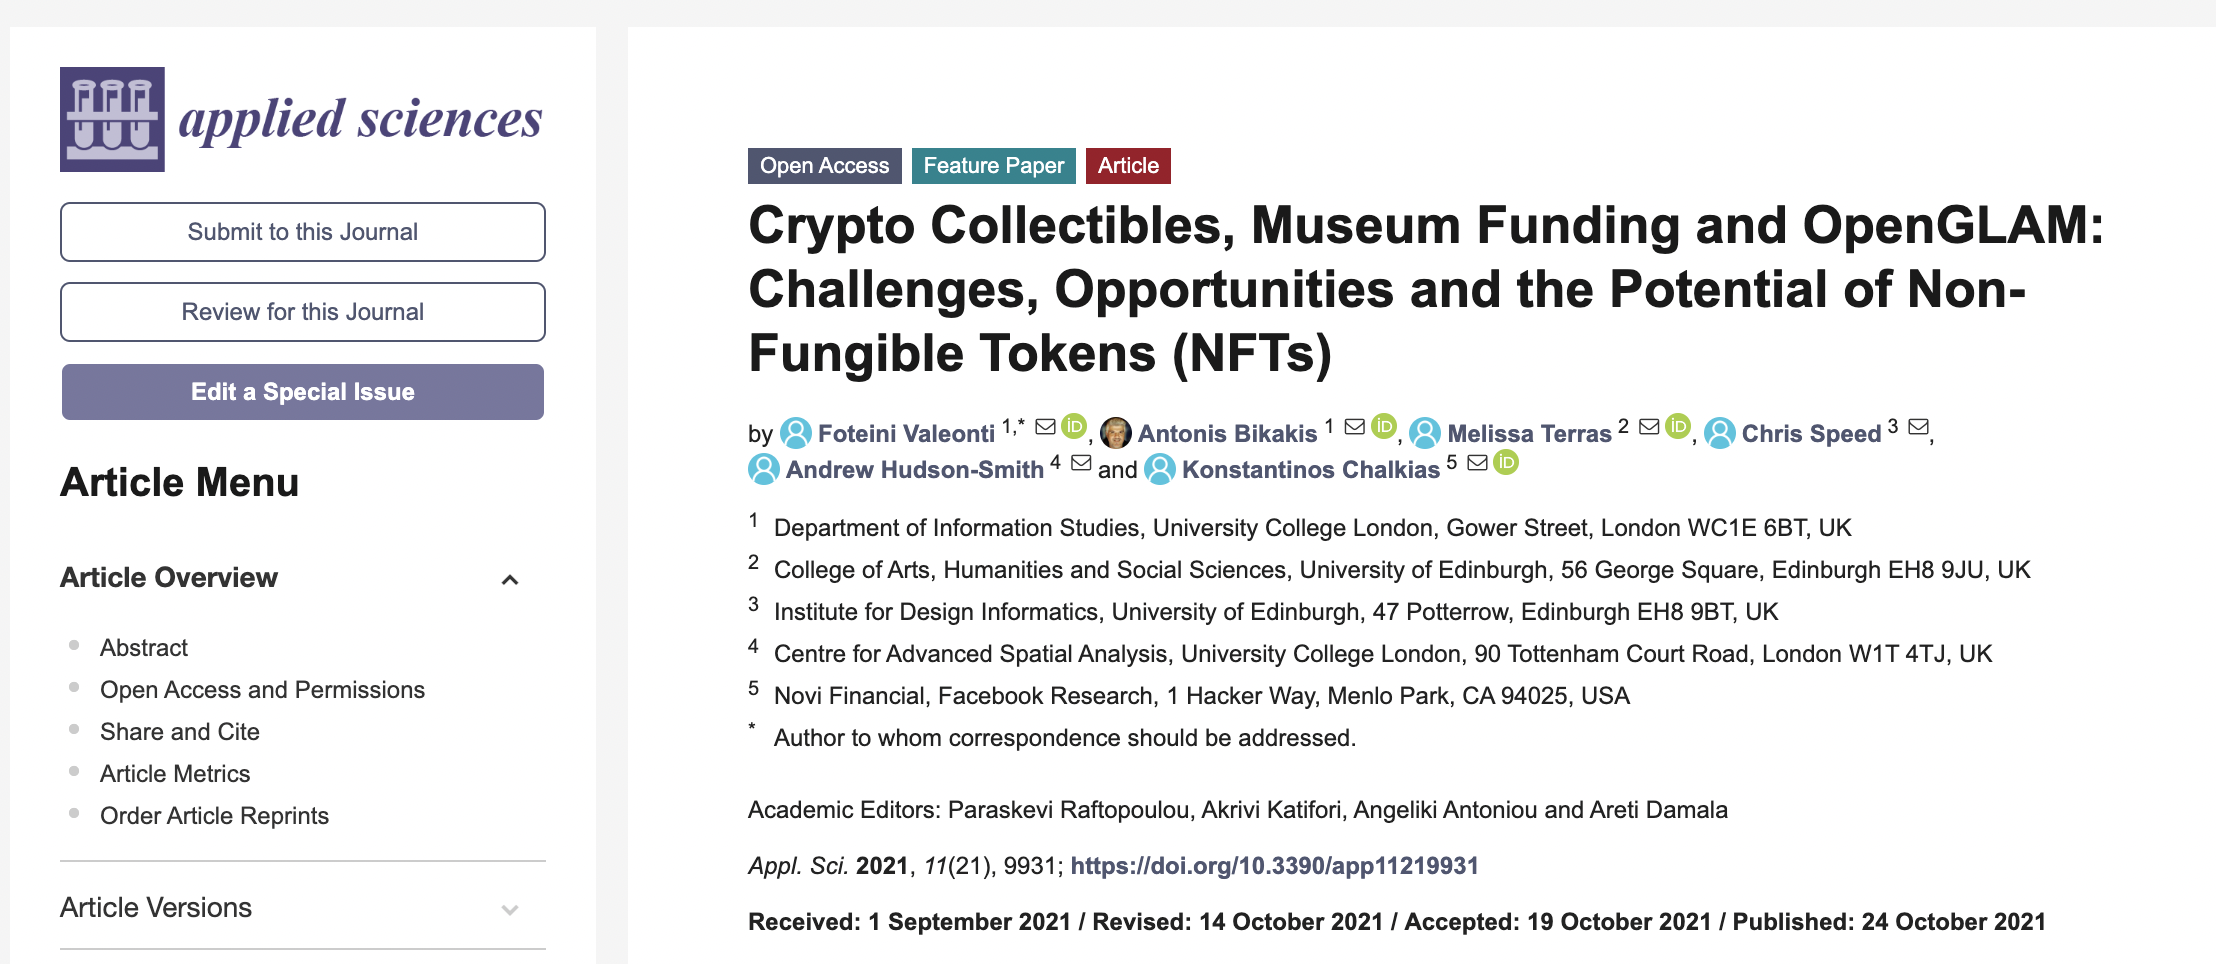 Crypto Collectibles, Museum Funding and OpenGLAM: Challenges, Opportunities and the Potential of Non-Fungible Tokens (NFTs)